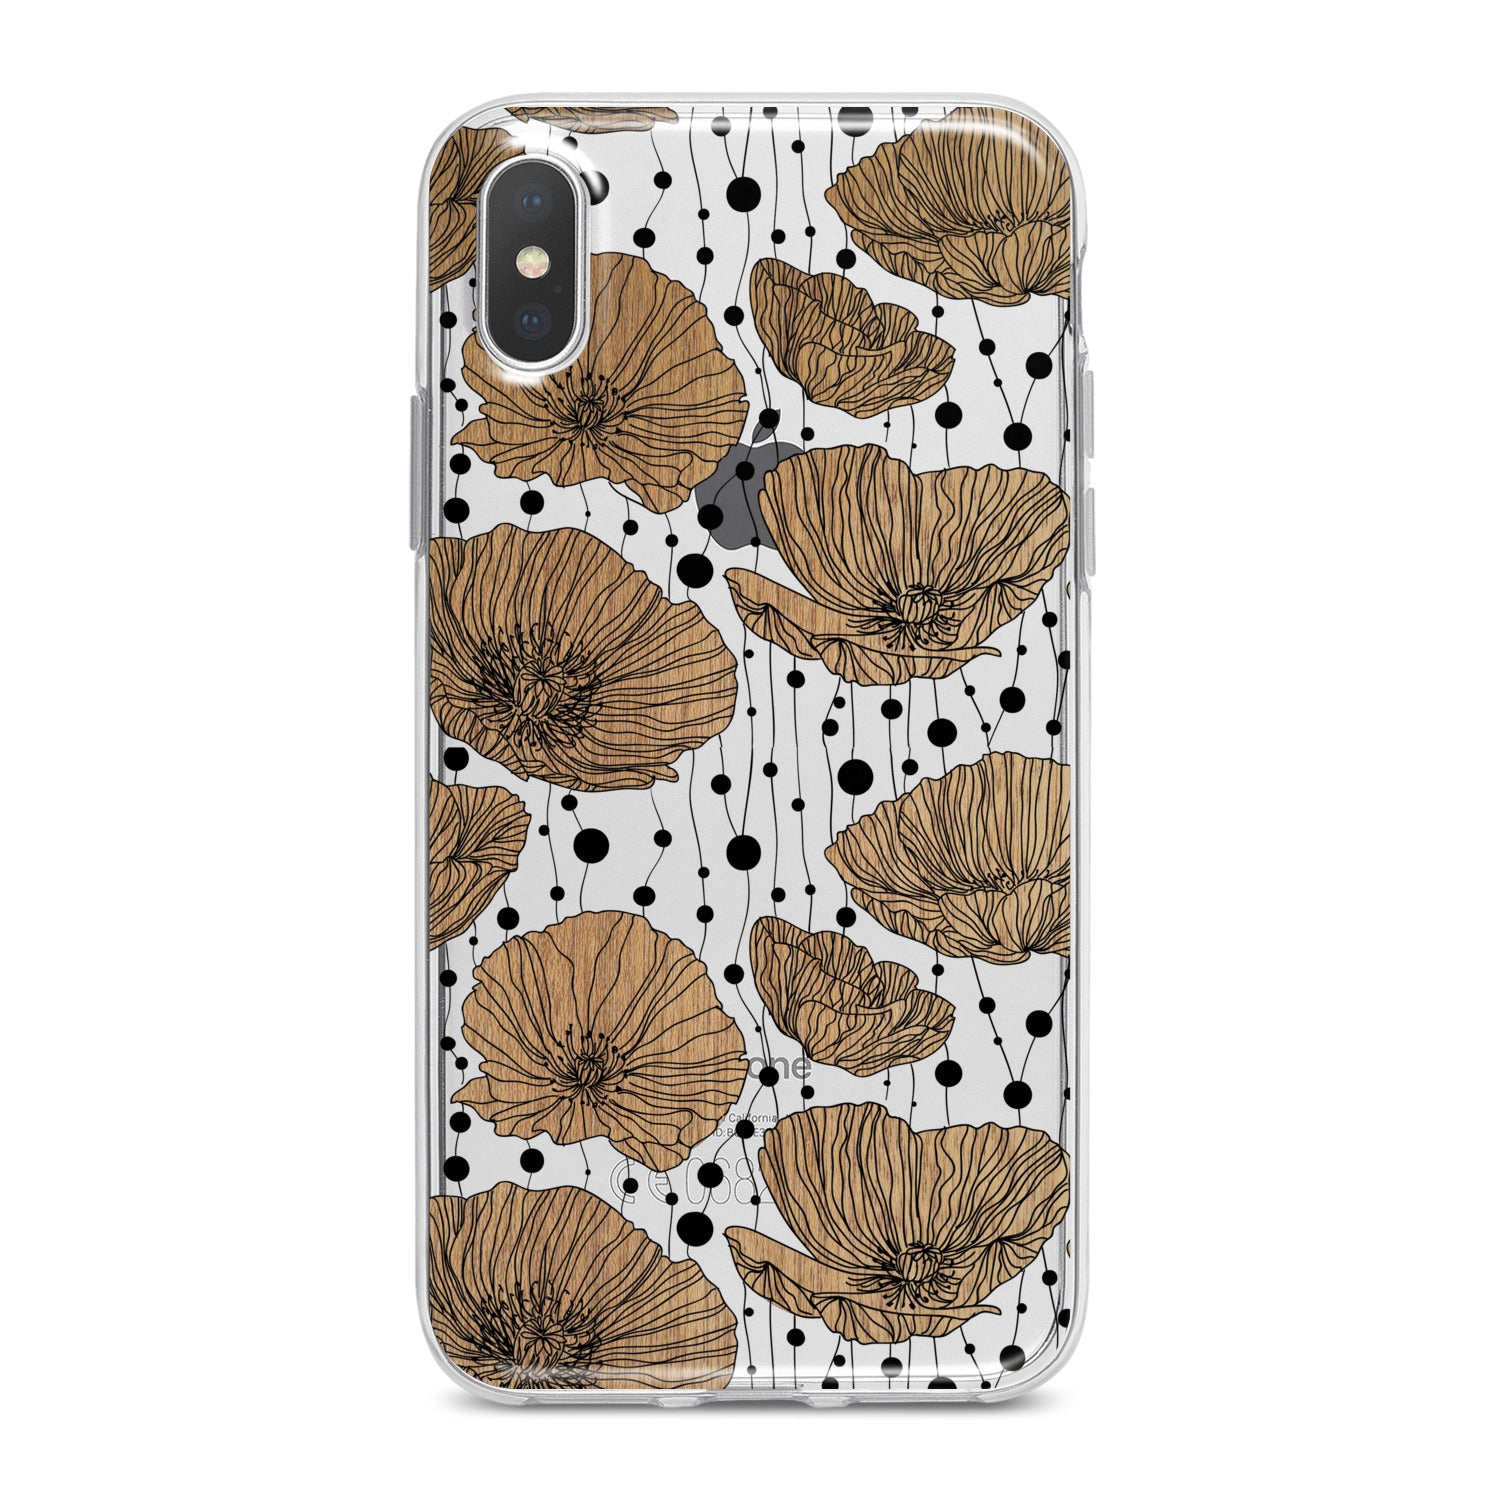 Lex Altern Contoured Poppies Phone Case for your iPhone & Android phone.